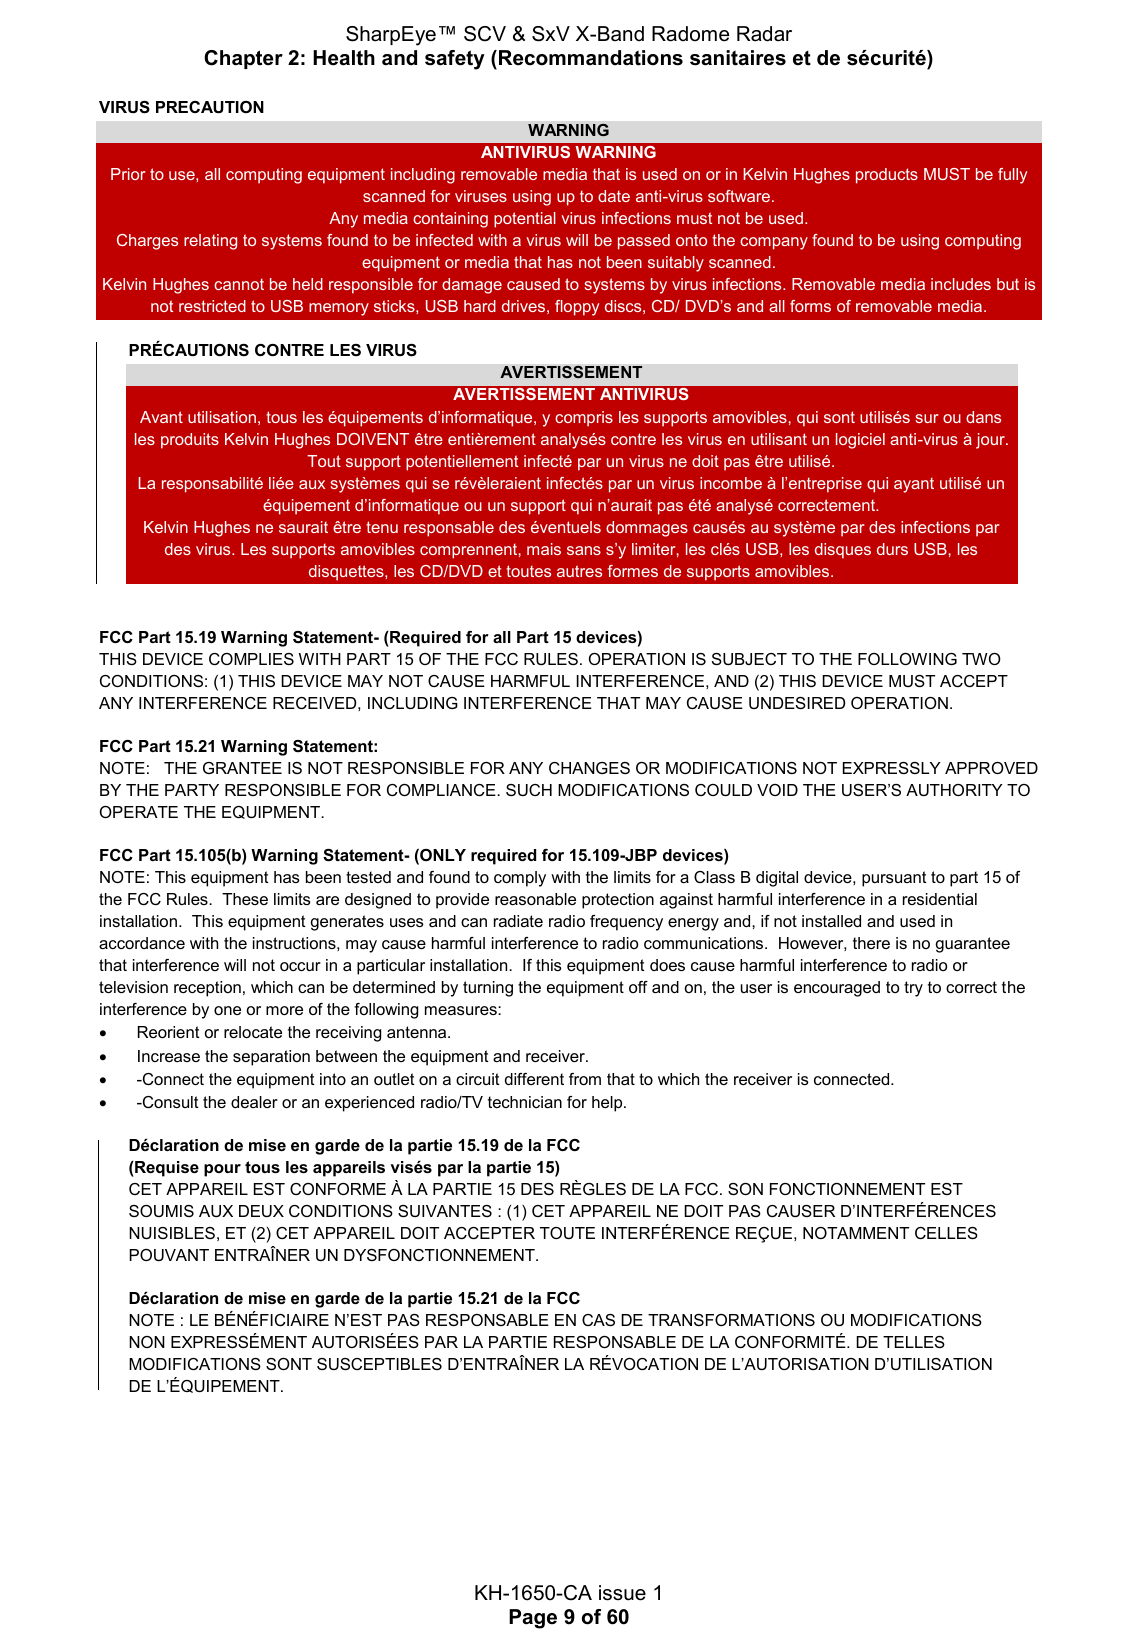 SharpEye™ SCV &amp; SxV X-Band Radome Radar Chapter 2: Health and safety (Recommandations sanitaires et de sécurité)  KH-1650-CA issue 1 Page 9 of 60 VIRUS PRECAUTION WARNING ANTIVIRUS WARNING Prior to use, all computing equipment including removable media that is used on or in Kelvin Hughes products MUST be fully scanned for viruses using up to date anti-virus software. Any media containing potential virus infections must not be used. Charges relating to systems found to be infected with a virus will be passed onto the company found to be using computing equipment or media that has not been suitably scanned. Kelvin Hughes cannot be held responsible for damage caused to systems by virus infections. Removable media includes but is not restricted to USB memory sticks, USB hard drives, floppy discs, CD/ DVD’s and all forms of removable media.  PRÉCAUTIONS CONTRE LES VIRUS AVERTISSEMENT AVERTISSEMENT ANTIVIRUS Avant utilisation, tous les équipements d’informatique, y compris les supports amovibles, qui sont utilisés sur ou dans les produits Kelvin Hughes DOIVENT être entièrement analysés contre les virus en utilisant un logiciel anti-virus à jour. Tout support potentiellement infecté par un virus ne doit pas être utilisé. La responsabilité liée aux systèmes qui se révèleraient infectés par un virus incombe à l’entreprise qui ayant utilisé un équipement d’informatique ou un support qui n’aurait pas été analysé correctement. Kelvin Hughes ne saurait être tenu responsable des éventuels dommages causés au système par des infections par des virus. Les supports amovibles comprennent, mais sans s’y limiter, les clés USB, les disques durs USB, les disquettes, les CD/DVD et toutes autres formes de supports amovibles.   FCC Part 15.19 Warning Statement- (Required for all Part 15 devices)  THIS DEVICE COMPLIES WITH PART 15 OF THE FCC RULES. OPERATION IS SUBJECT TO THE FOLLOWING TWO CONDITIONS: (1) THIS DEVICE MAY NOT CAUSE HARMFUL INTERFERENCE, AND (2) THIS DEVICE MUST ACCEPT ANY INTERFERENCE RECEIVED, INCLUDING INTERFERENCE THAT MAY CAUSE UNDESIRED OPERATION. FCC Part 15.21 Warning Statement: NOTE:   THE GRANTEE IS NOT RESPONSIBLE FOR ANY CHANGES OR MODIFICATIONS NOT EXPRESSLY APPROVED BY THE PARTY RESPONSIBLE FOR COMPLIANCE. SUCH MODIFICATIONS COULD VOID THE USER’S AUTHORITY TO OPERATE THE EQUIPMENT. FCC Part 15.105(b) Warning Statement- (ONLY required for 15.109-JBP devices) NOTE: This equipment has been tested and found to comply with the limits for a Class B digital device, pursuant to part 15 of the FCC Rules.  These limits are designed to provide reasonable protection against harmful interference in a residential installation.  This equipment generates uses and can radiate radio frequency energy and, if not installed and used in accordance with the instructions, may cause harmful interference to radio communications.  However, there is no guarantee that interference will not occur in a particular installation.  If this equipment does cause harmful interference to radio or television reception, which can be determined by turning the equipment off and on, the user is encouraged to try to correct the interference by one or more of the following measures:   Reorient or relocate the receiving antenna.   Increase the separation between the equipment and receiver.   -Connect the equipment into an outlet on a circuit different from that to which the receiver is connected.   -Consult the dealer or an experienced radio/TV technician for help. Déclaration de mise en garde de la partie 15.19 de la FCC  (Requise pour tous les appareils visés par la partie 15)  CET APPAREIL EST CONFORME À LA PARTIE 15 DES RÈGLES DE LA FCC. SON FONCTIONNEMENT EST SOUMIS AUX DEUX CONDITIONS SUIVANTES : (1) CET APPAREIL NE DOIT PAS CAUSER D’INTERFÉRENCES NUISIBLES, ET (2) CET APPAREIL DOIT ACCEPTER TOUTE INTERFÉRENCE REÇUE, NOTAMMENT CELLES POUVANT ENTRAÎNER UN DYSFONCTIONNEMENT. Déclaration de mise en garde de la partie 15.21 de la FCC NOTE : LE BÉNÉFICIAIRE N’EST PAS RESPONSABLE EN CAS DE TRANSFORMATIONS OU MODIFICATIONS NON EXPRESSÉMENT AUTORISÉES PAR LA PARTIE RESPONSABLE DE LA CONFORMITÉ. DE TELLES MODIFICATIONS SONT SUSCEPTIBLES D’ENTRAÎNER LA RÉVOCATION DE L’AUTORISATION D’UTILISATION DE L’ÉQUIPEMENT.    